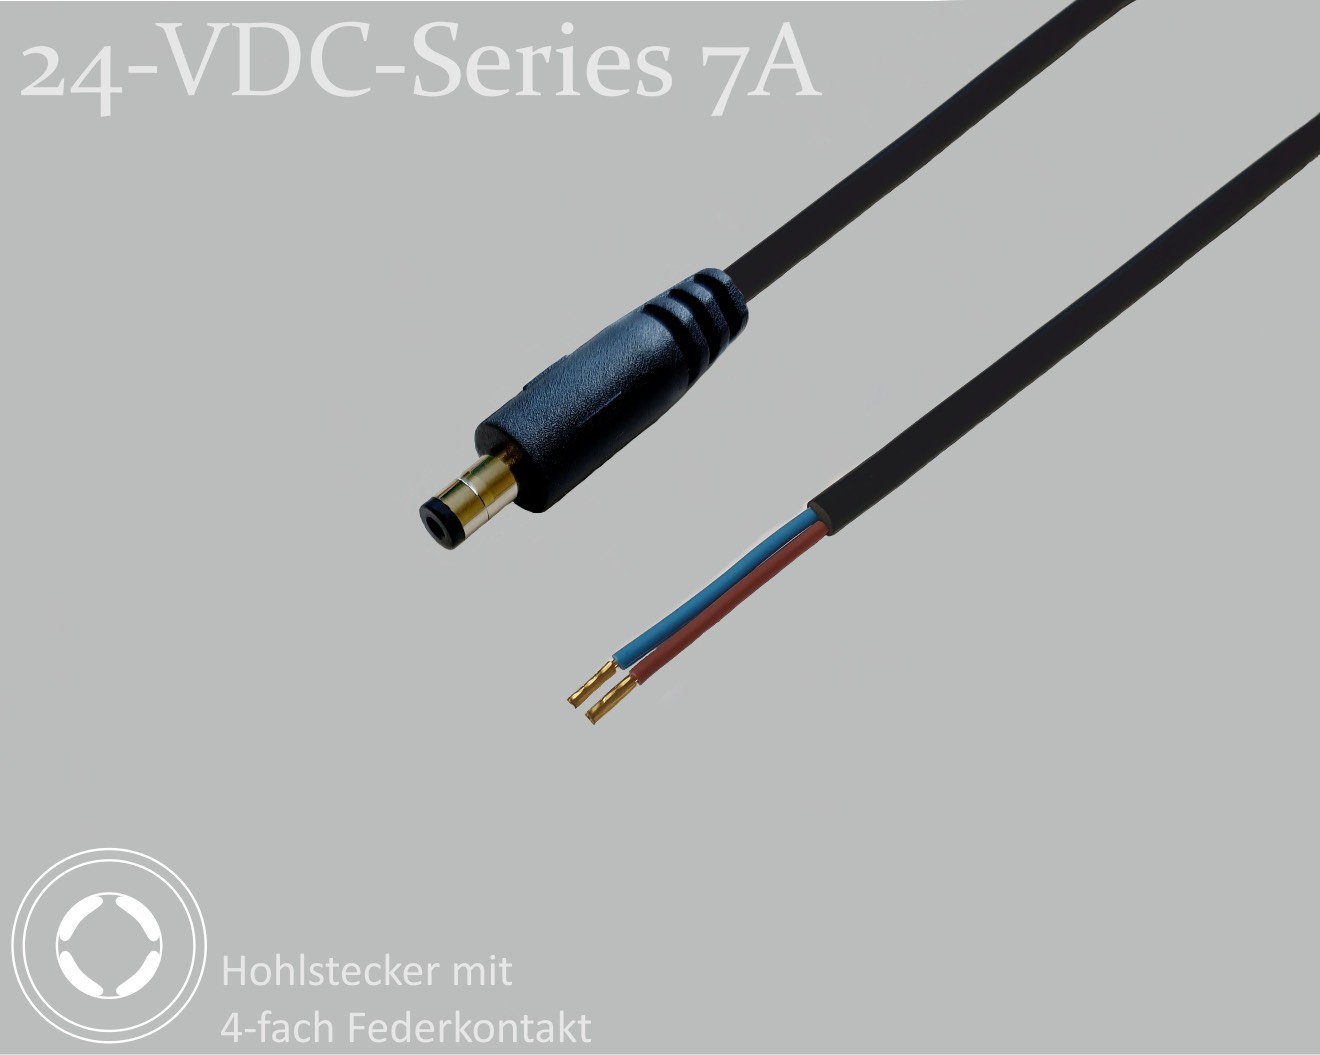 24-VDC-Series 7A, DC connection cable, DC plug with 4-spring contact 2.1x5.5x9.5mm, round cable 2x0.50mm², black, wire end sleeves, 1.5m